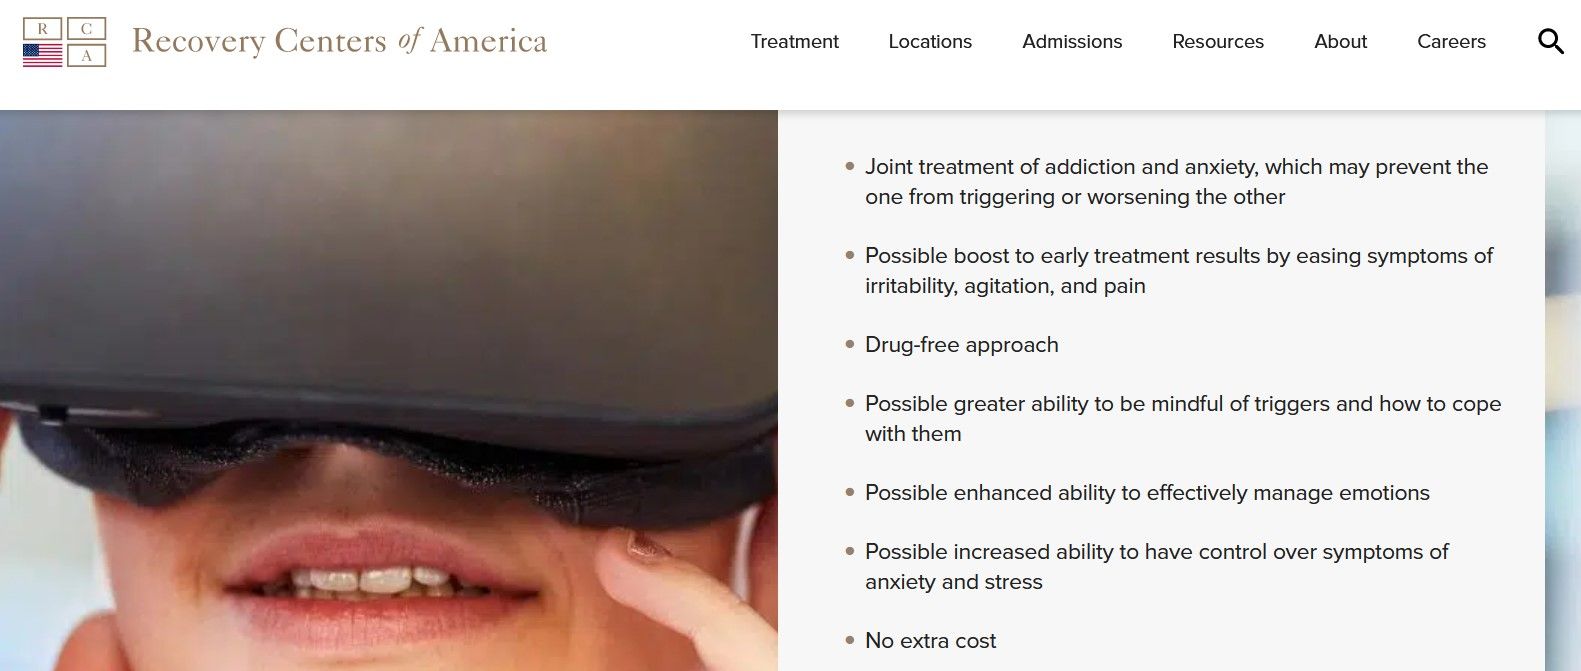 Recovery Centers of America VR Treatment Benefits